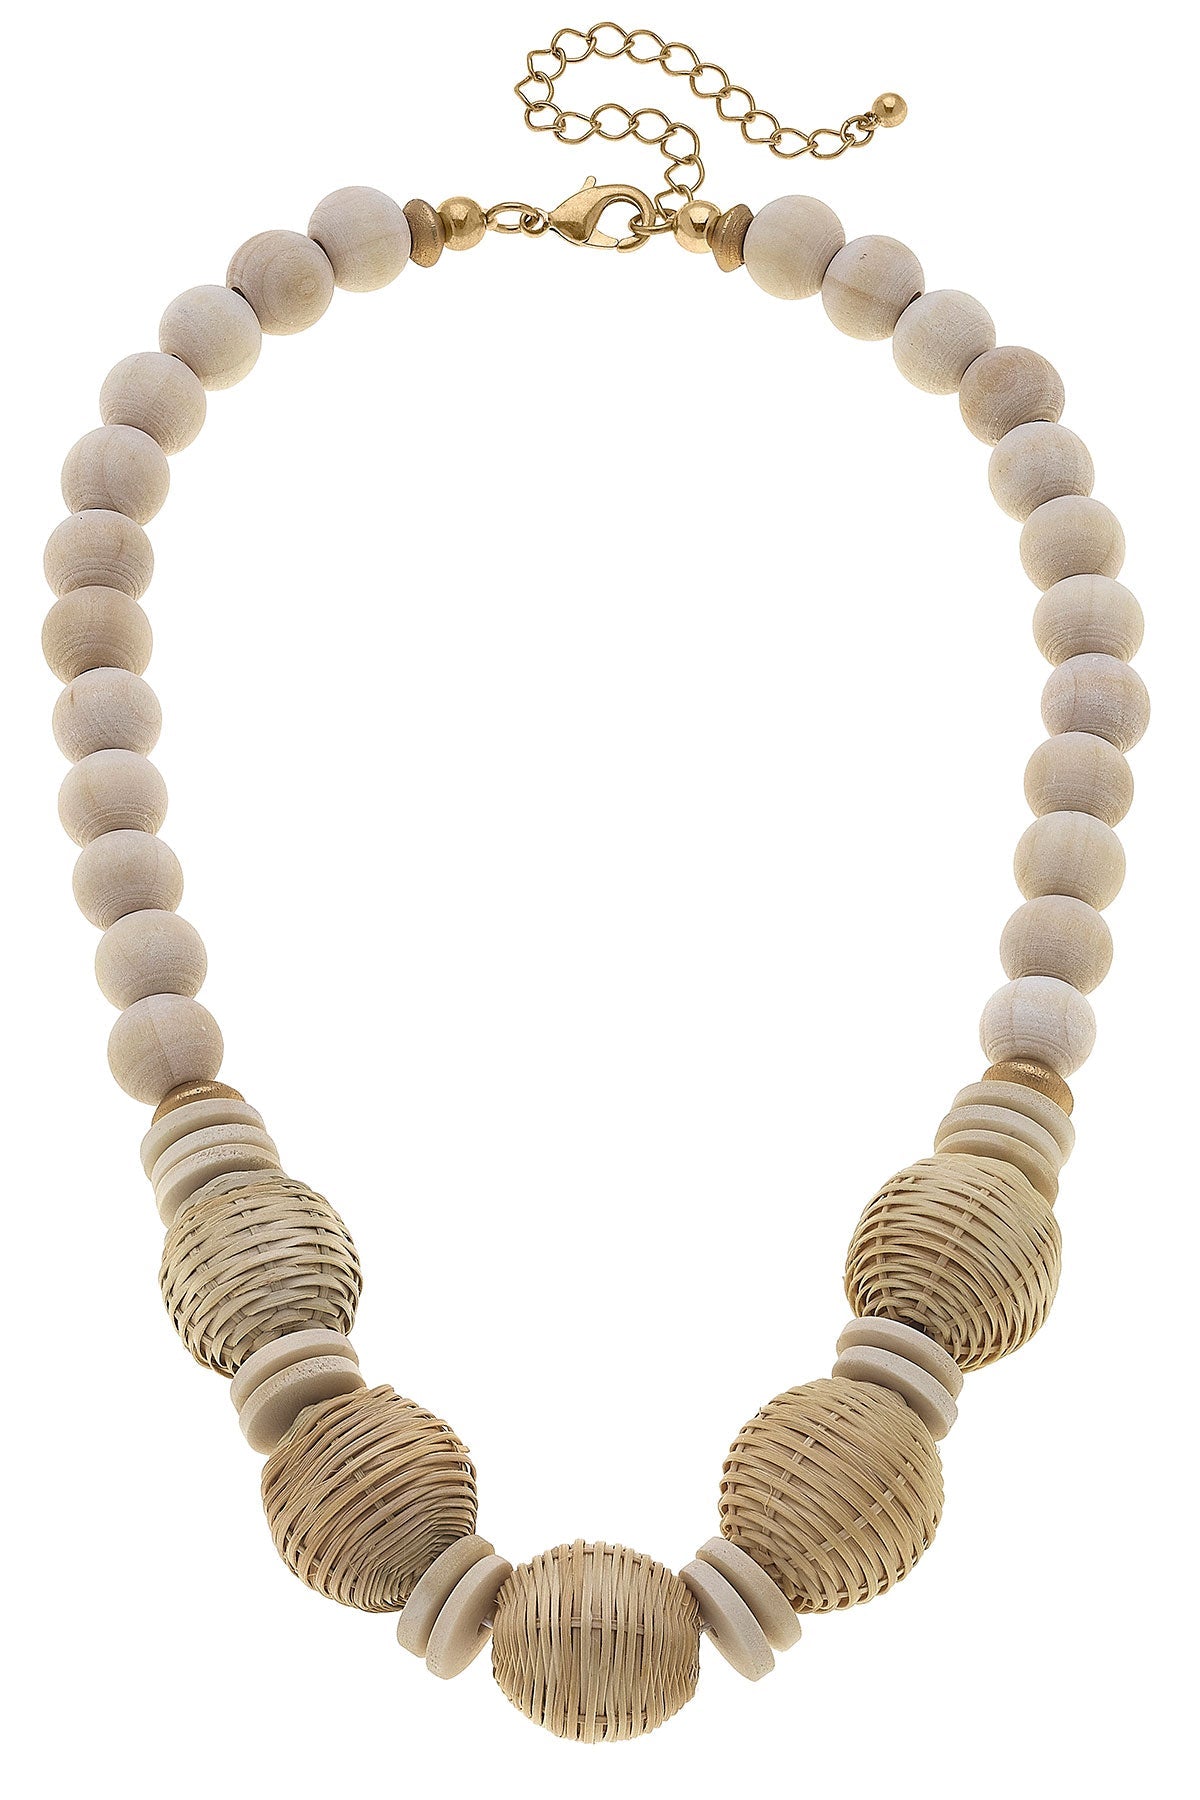 Angelina Wicker & Wood Beaded Necklace in Natural